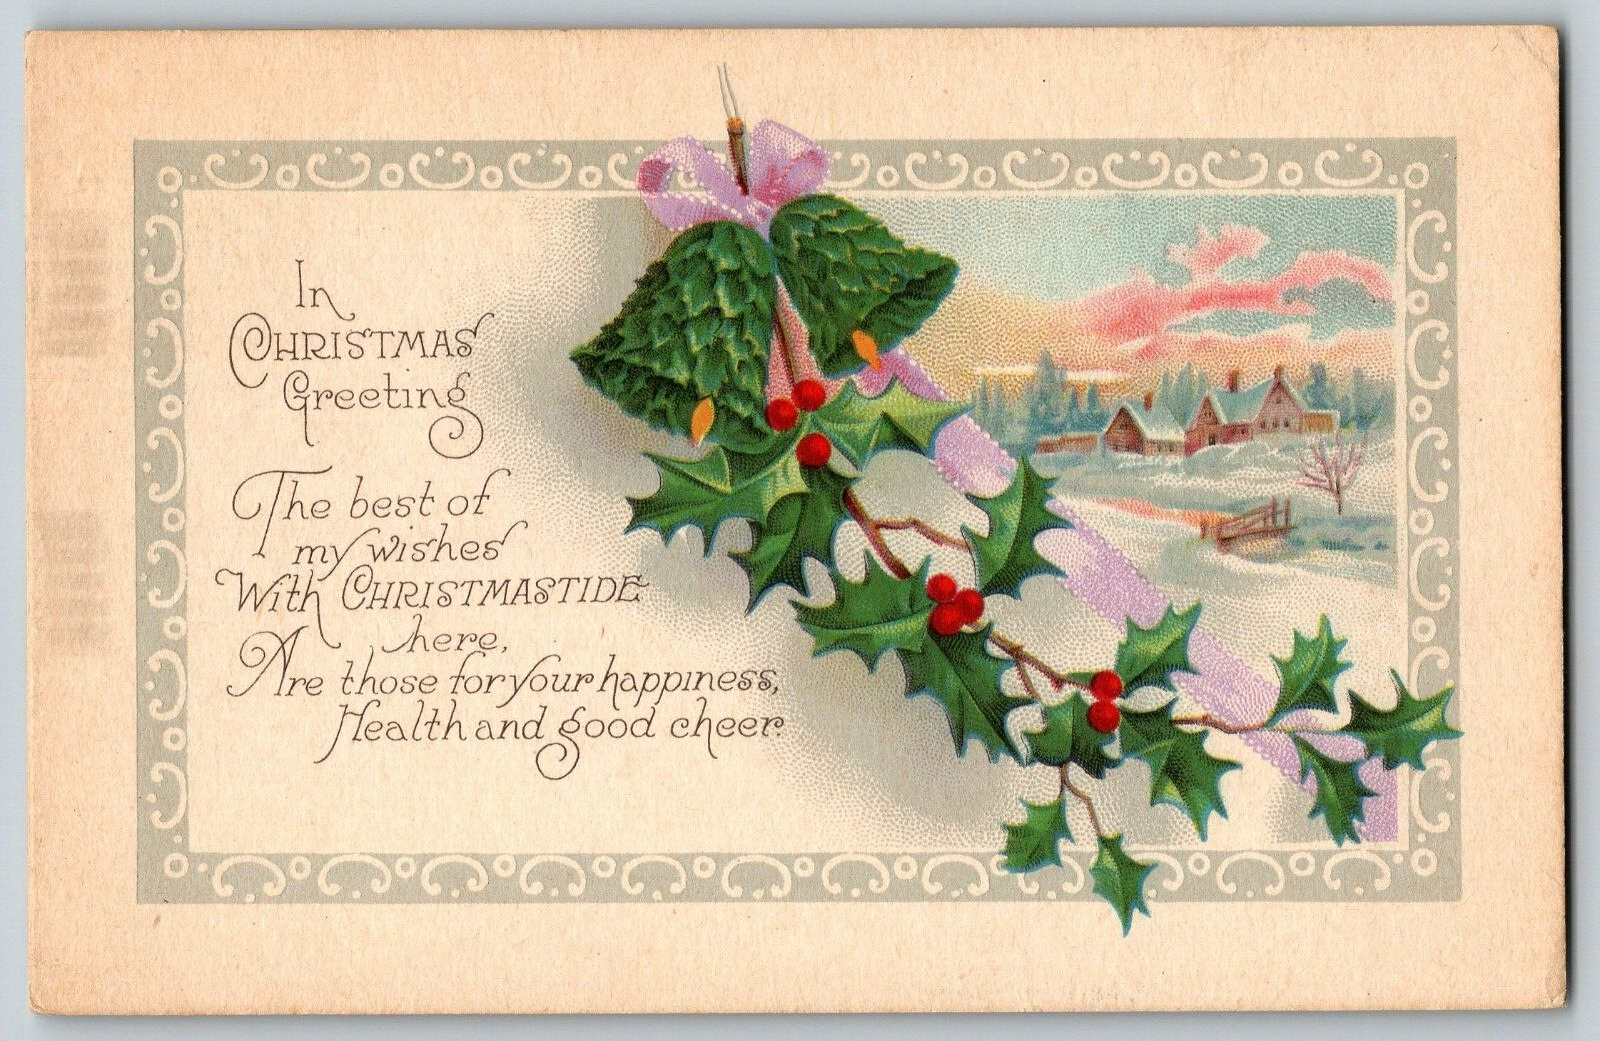 Christmas Holidays - In Christmas Greetings - Vintage Postcard - Unposted